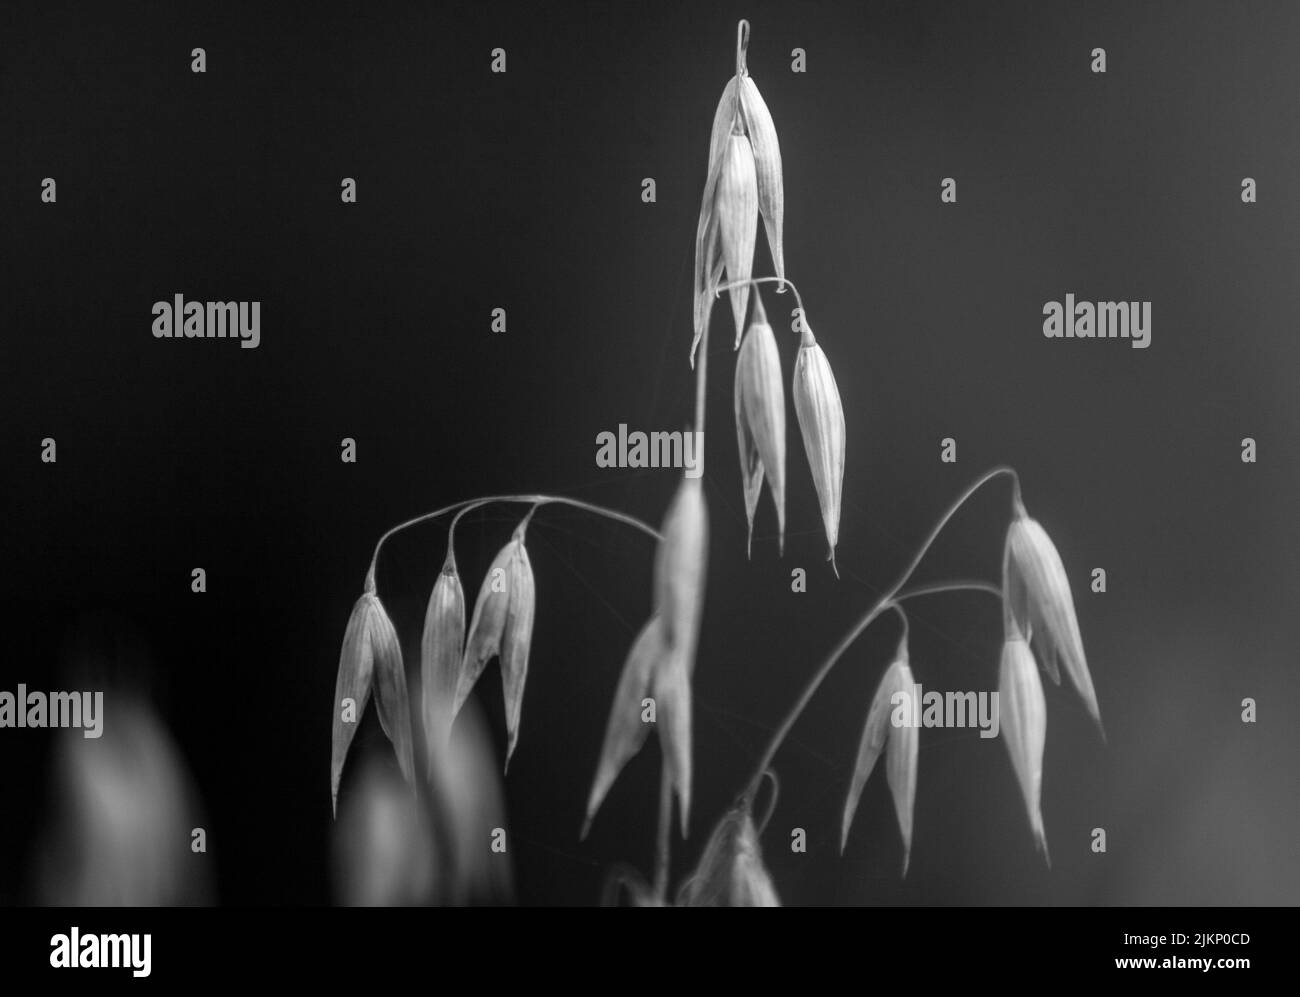 A grayscale shot of Oats Kauffman Seeds growing on the plant Stock Photo